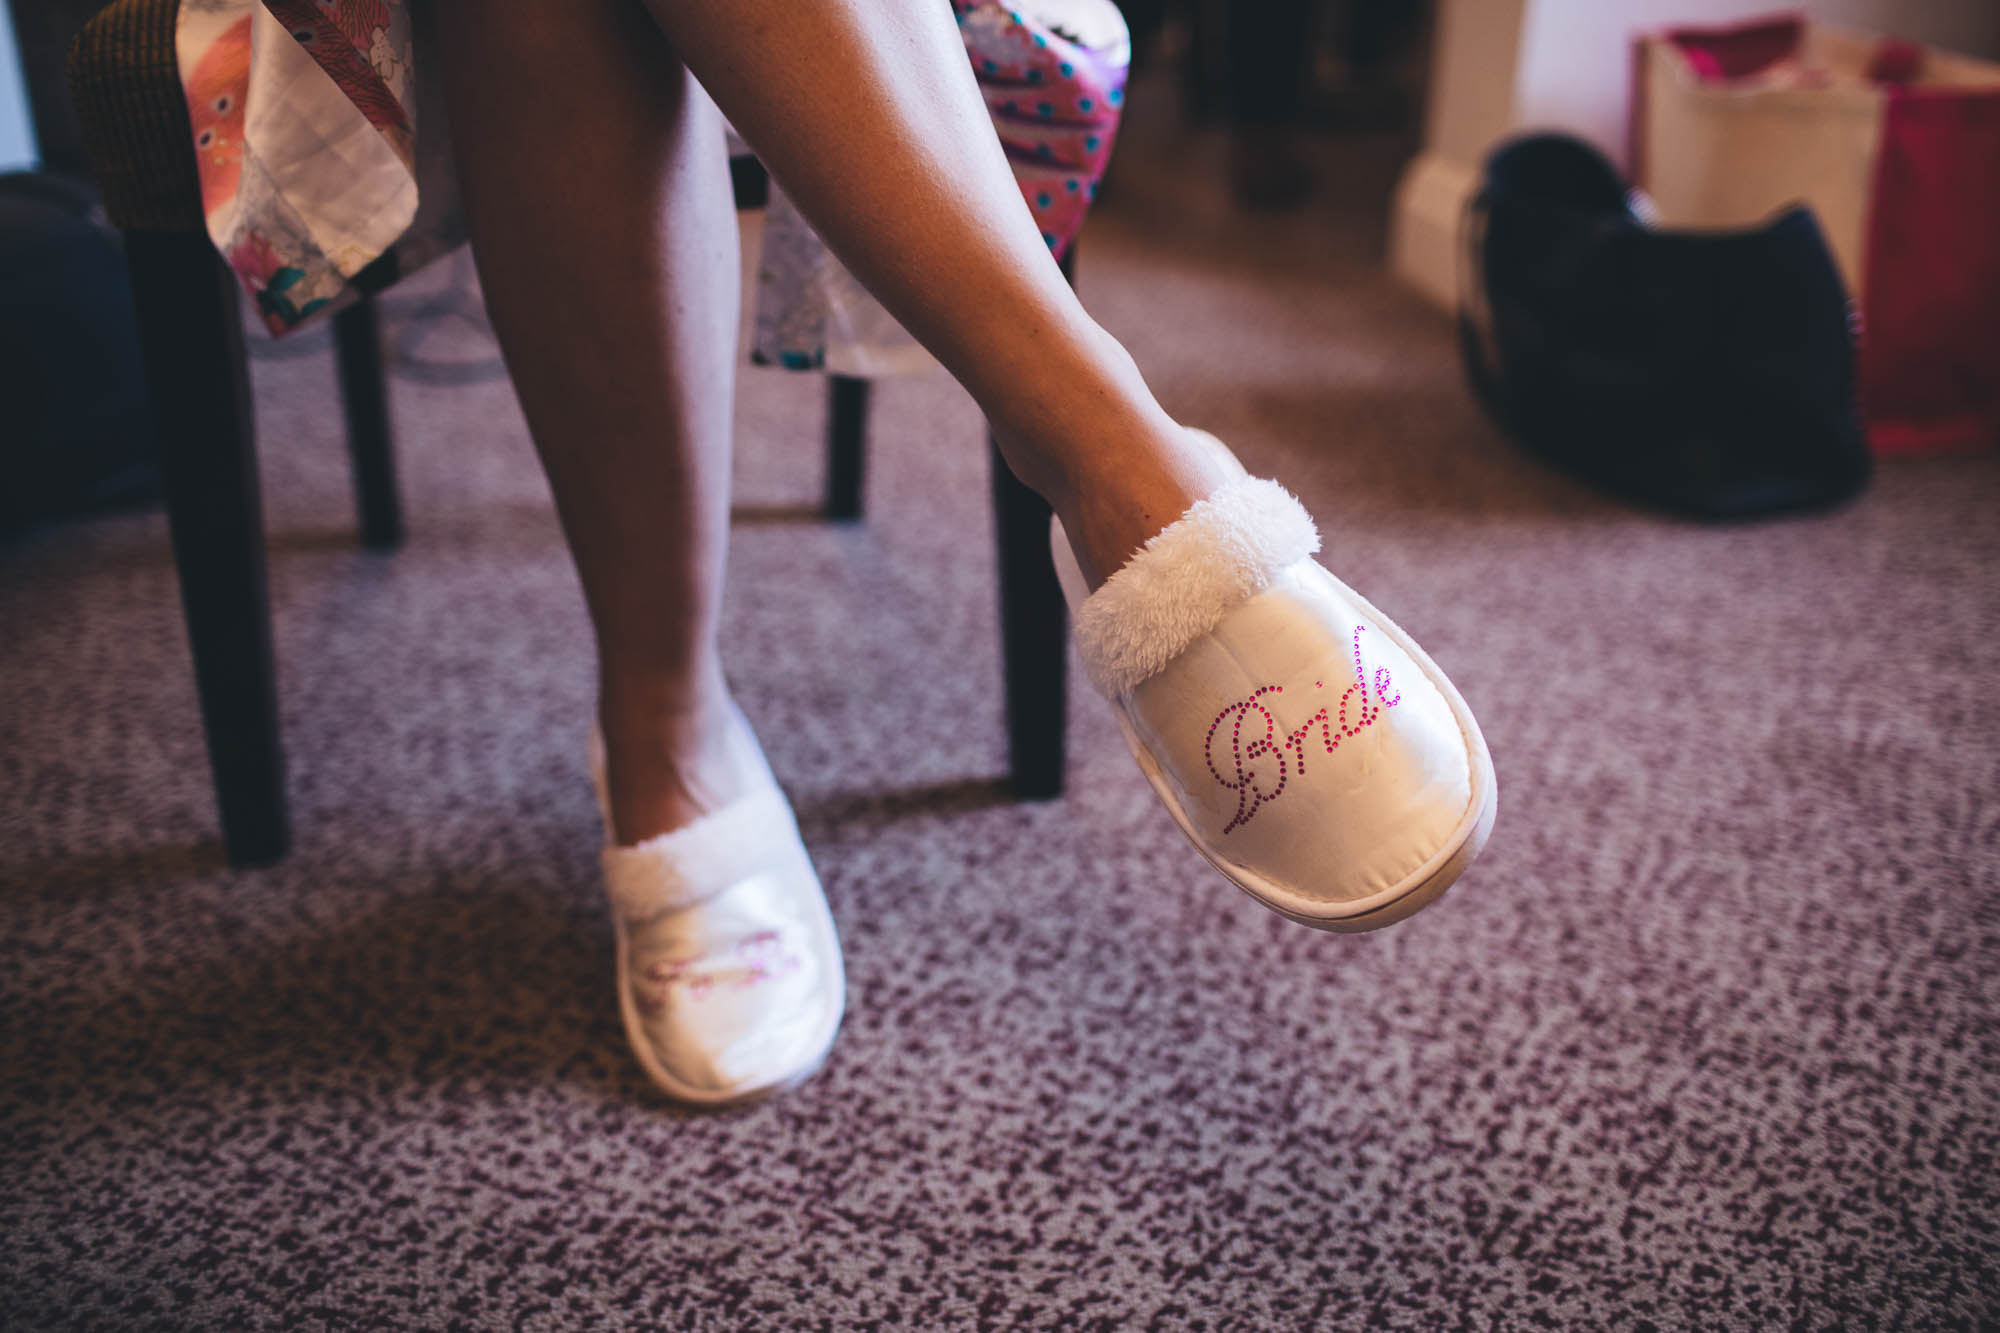 Close up shot of brides feet wearing special slippers that say bride during bridal preparations